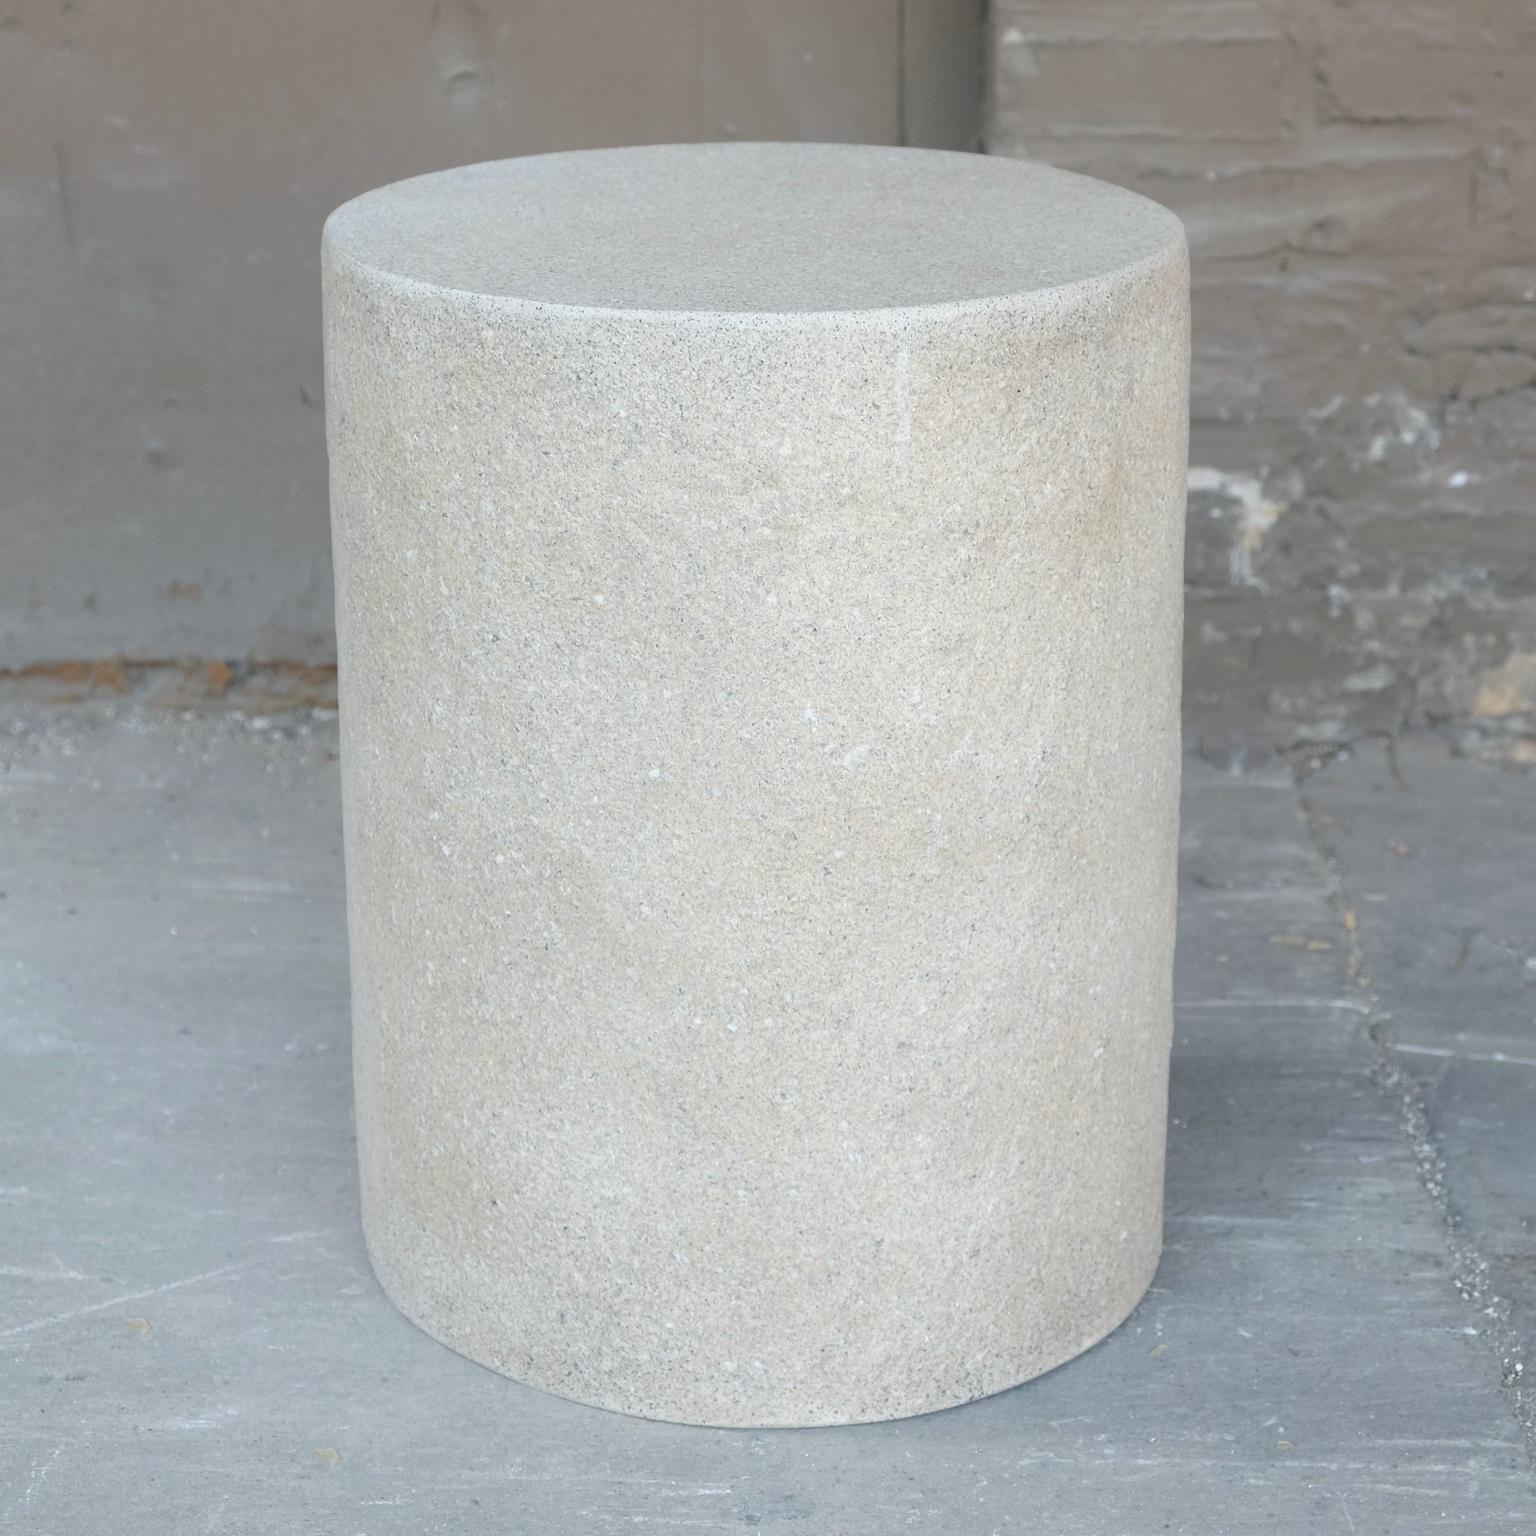 Minimalist Cast Resin 'Dock' Side Table, Aged Finish by Zachary A. Design For Sale